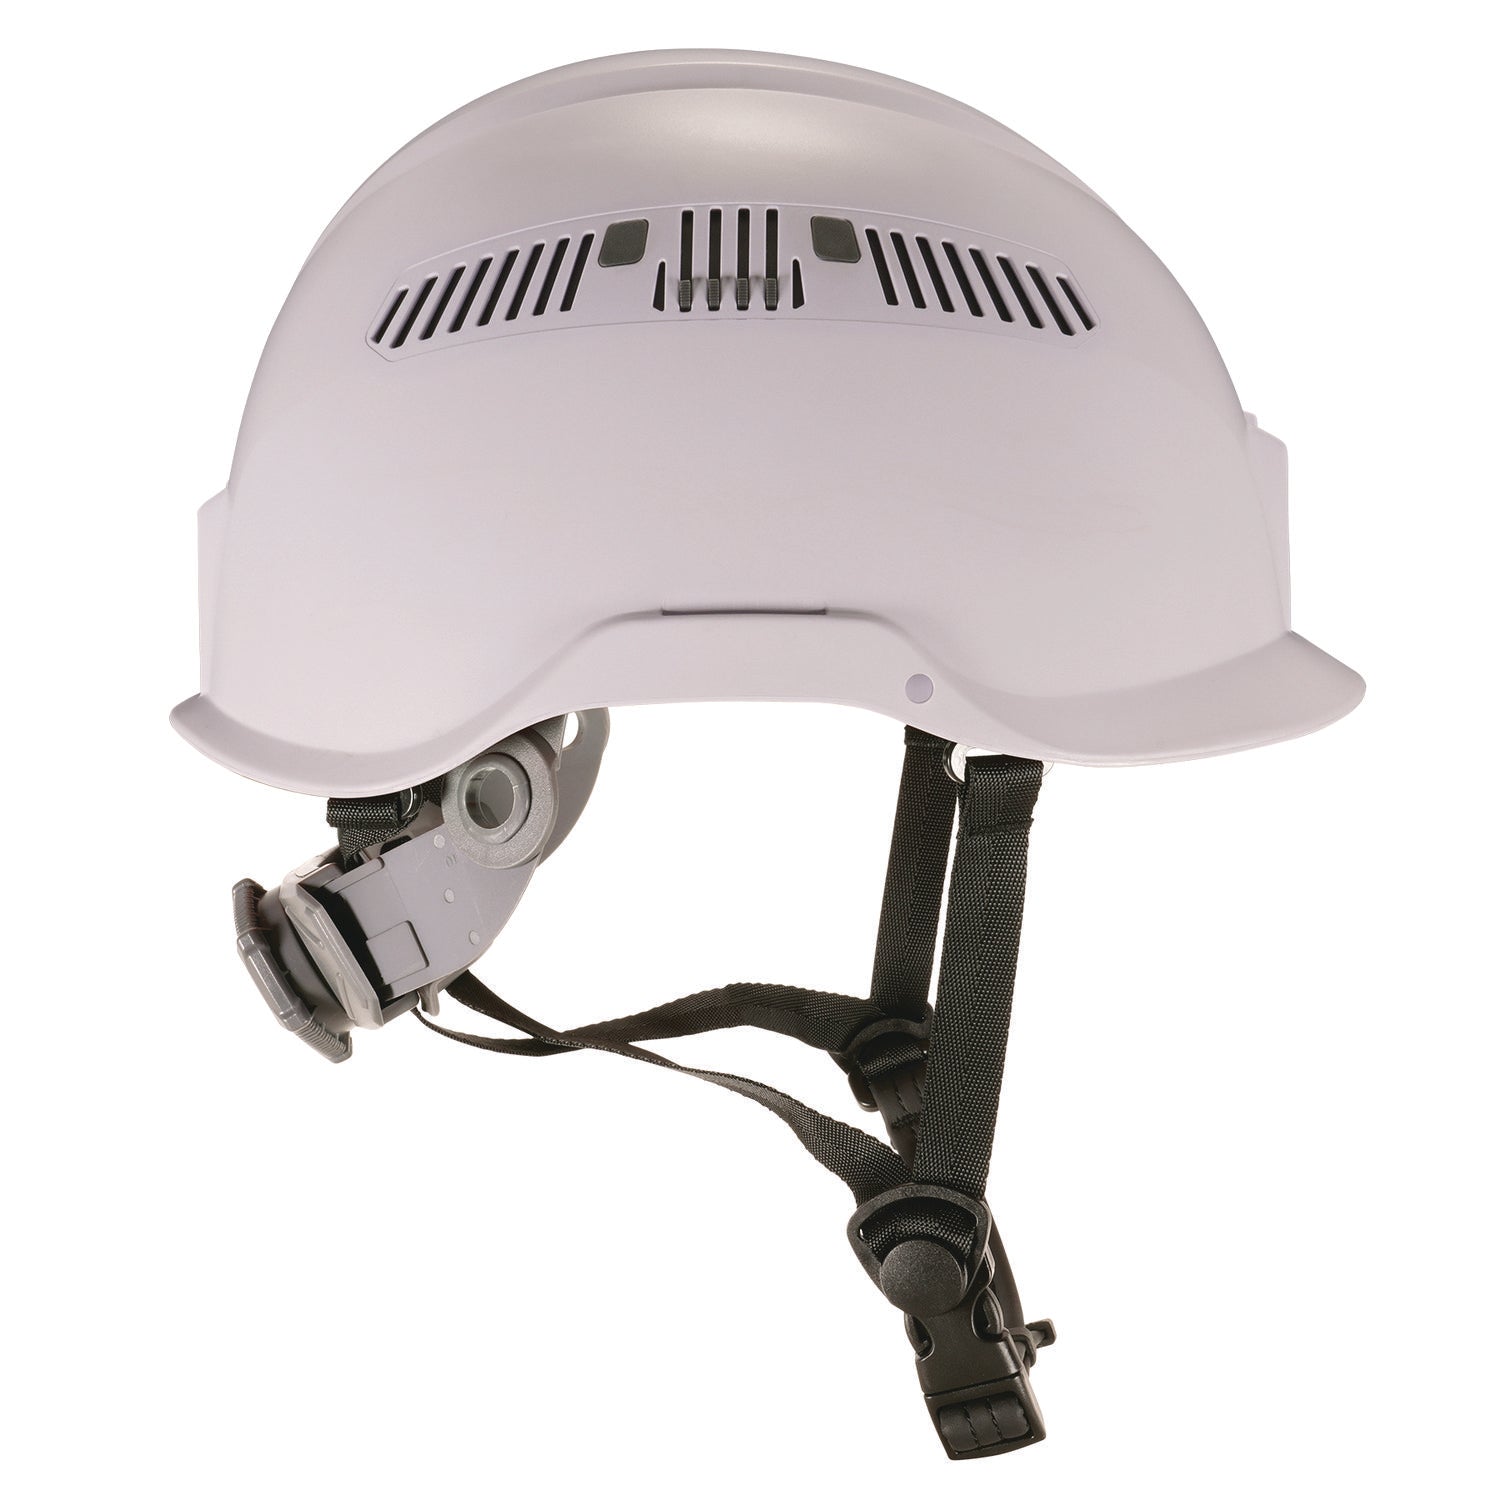 skullerz-8977-class-c-safety-helmet-with-adjustable-venting-6-point-rachet-suspension-white-ships-in-1-3-business-days_ego60264 - 4